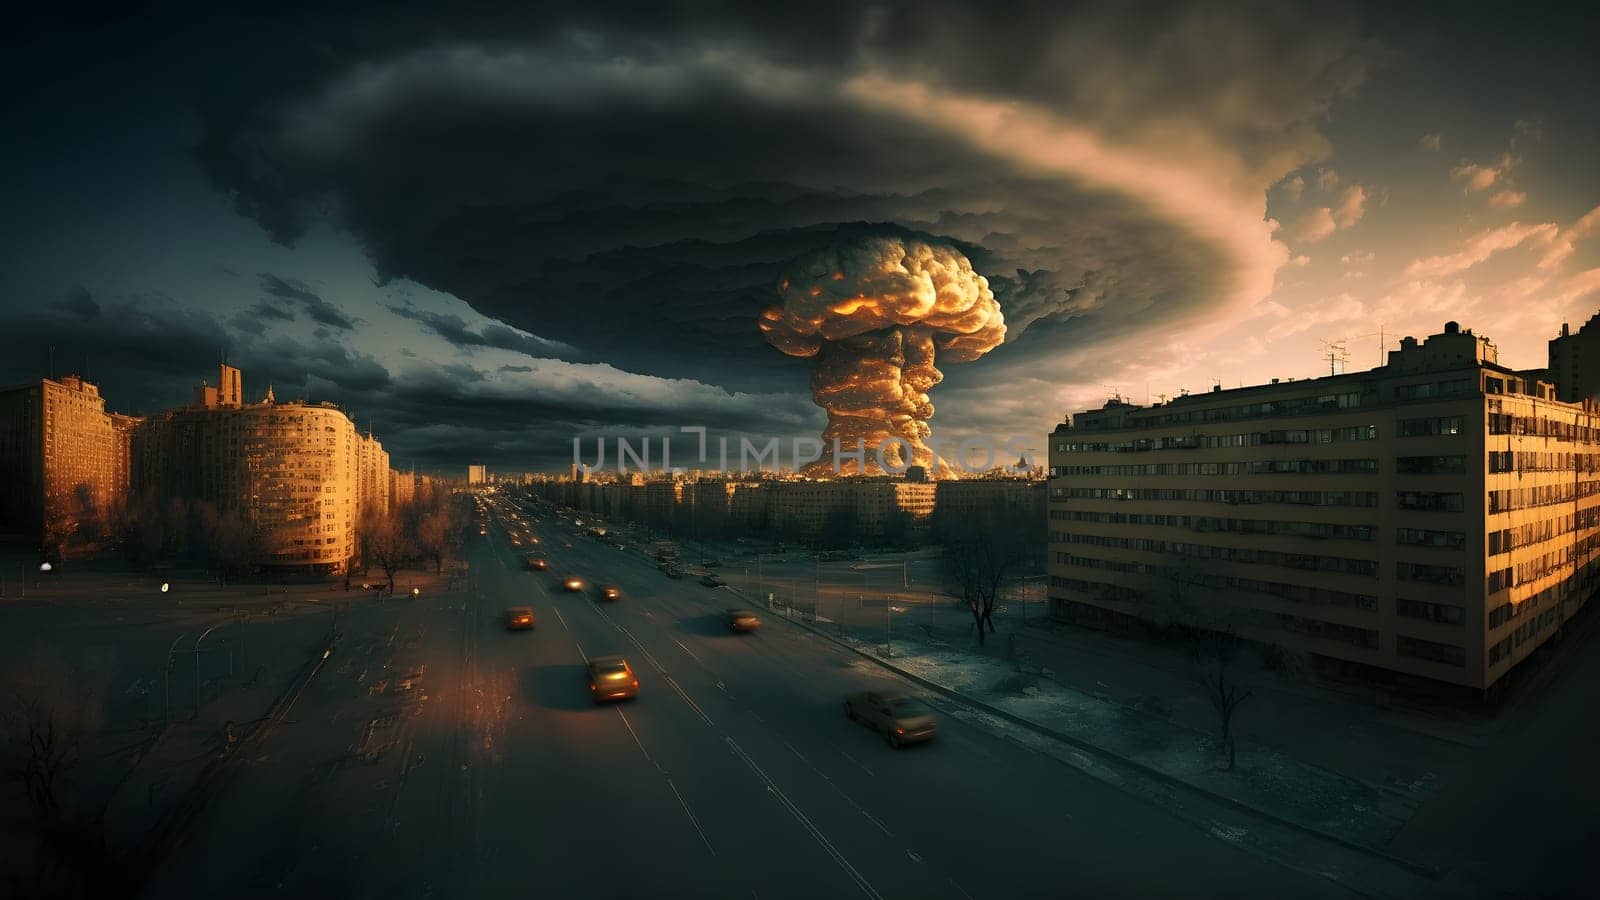 nuclear explosion mushroom cloud over russian city at winter morning, neural network generated art by z1b